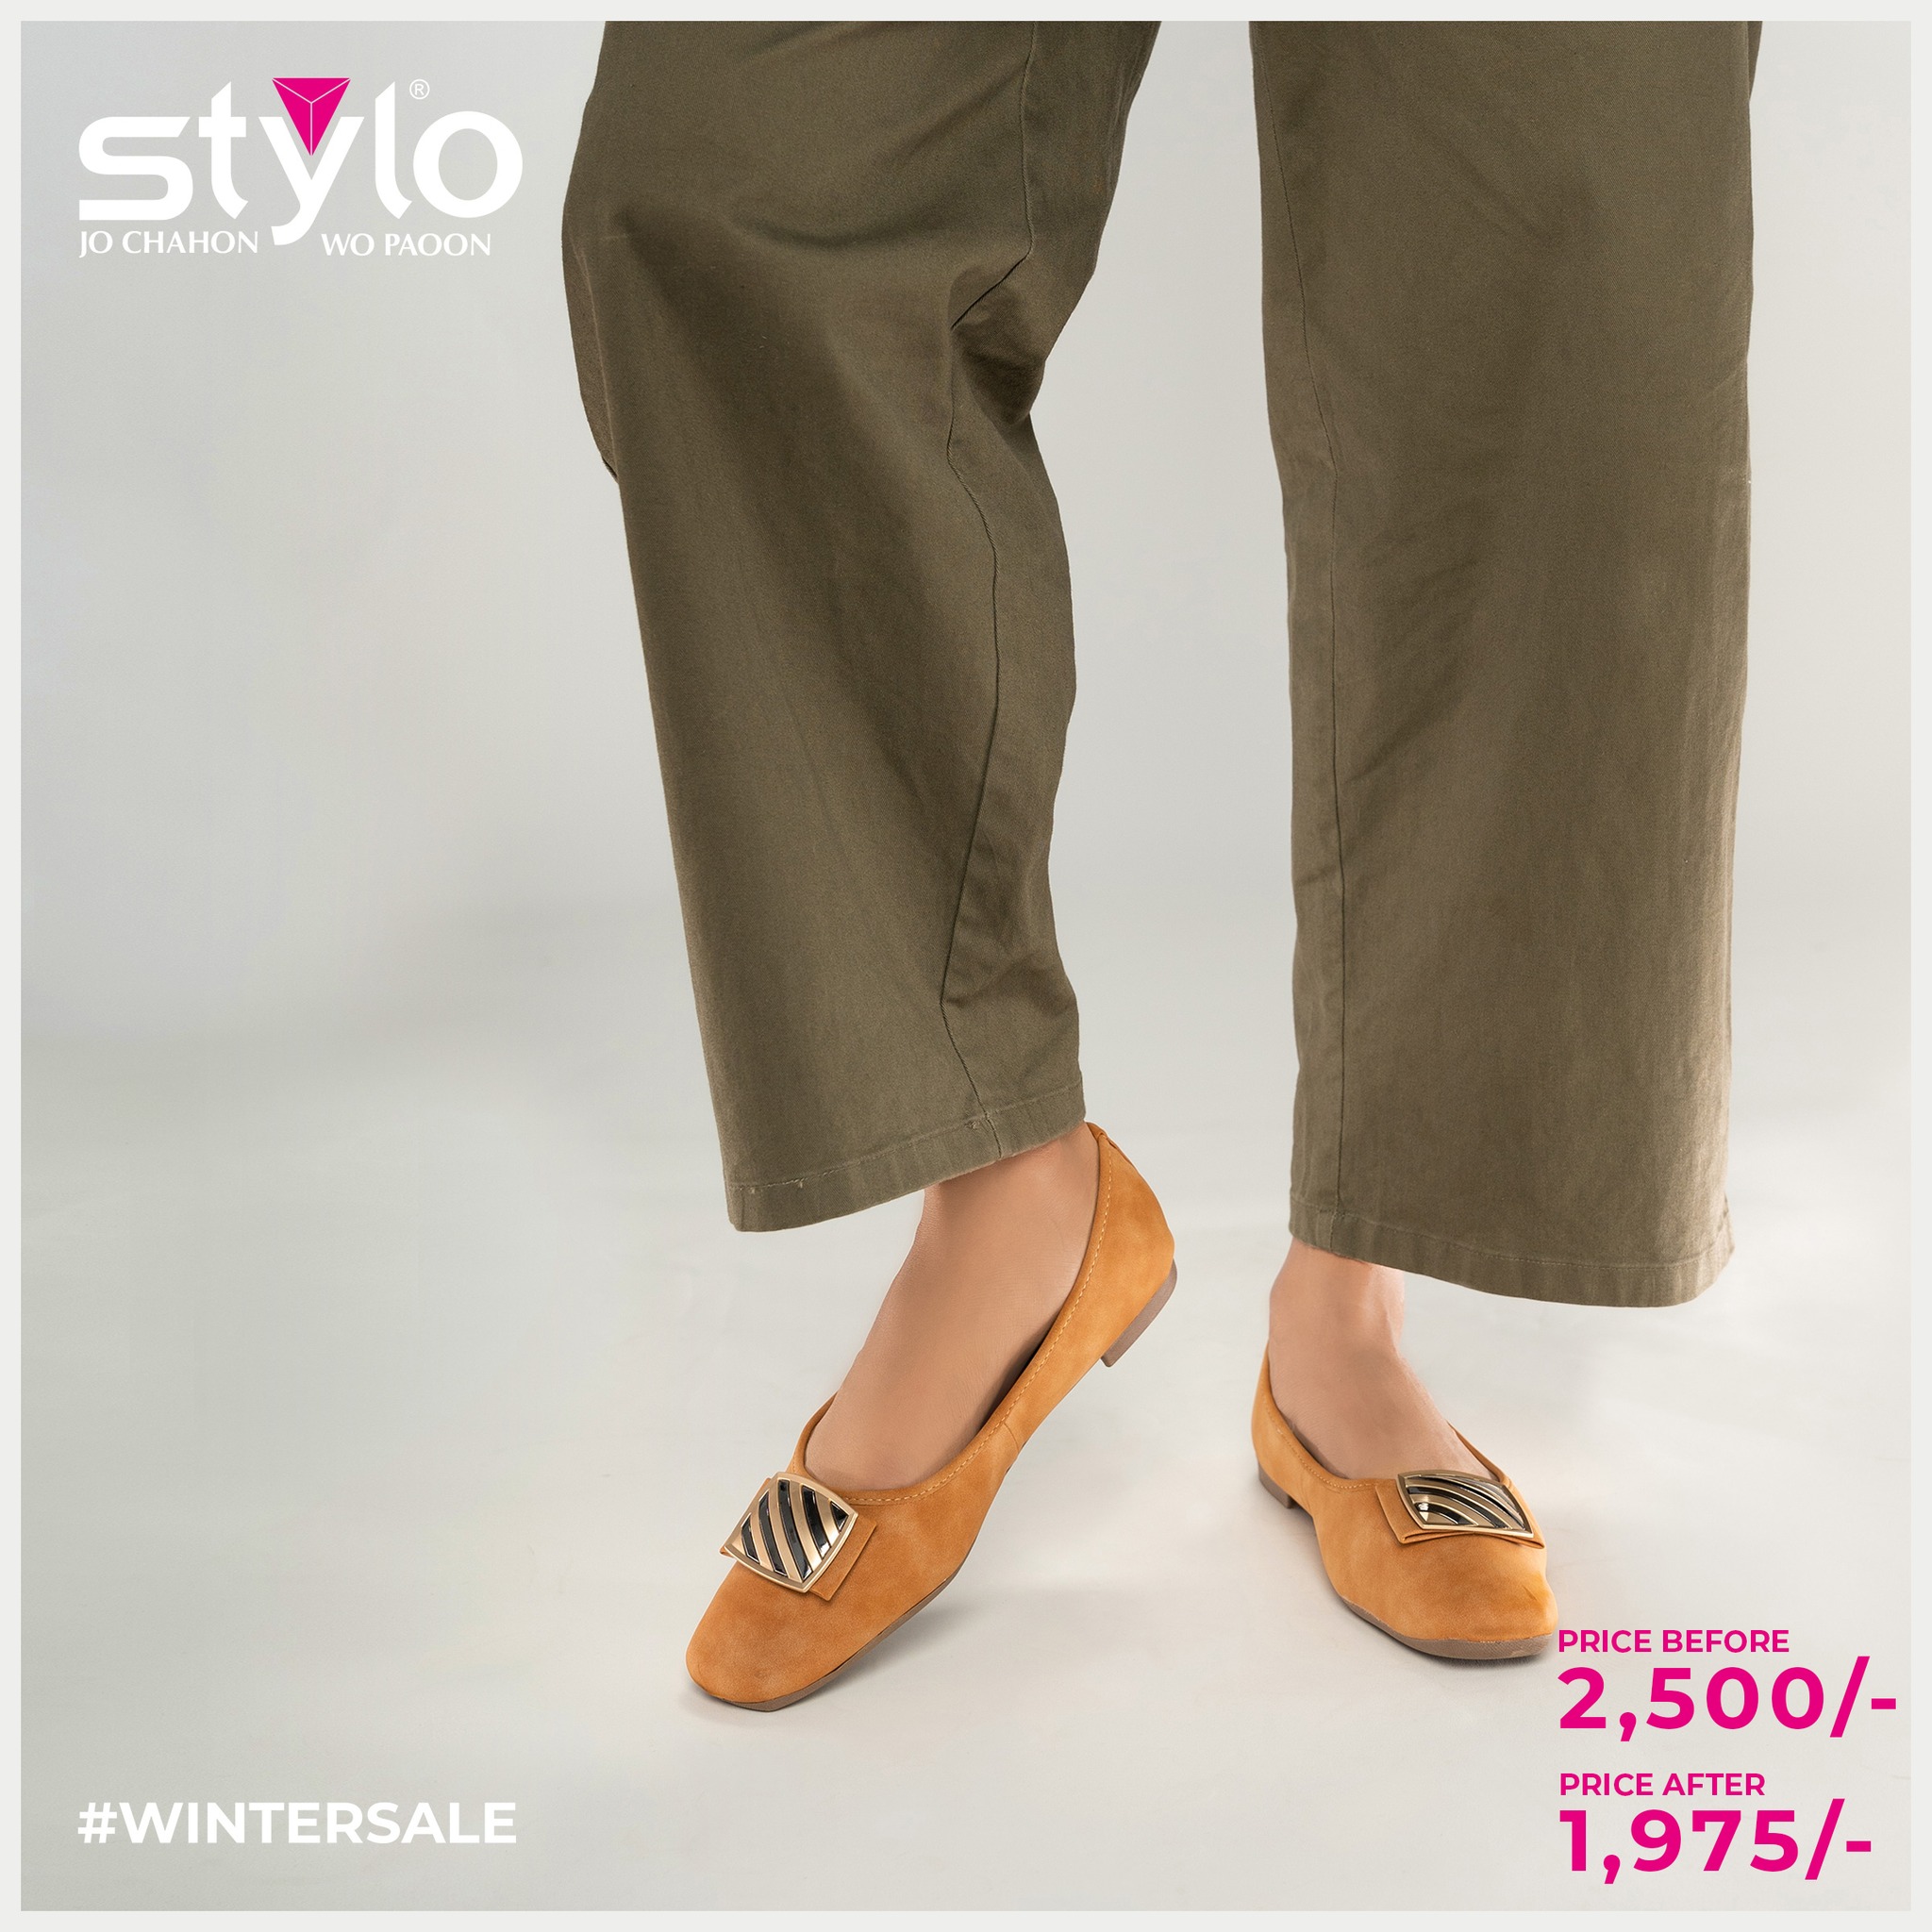 Yellow color stylish shoes on Stylo winter sale